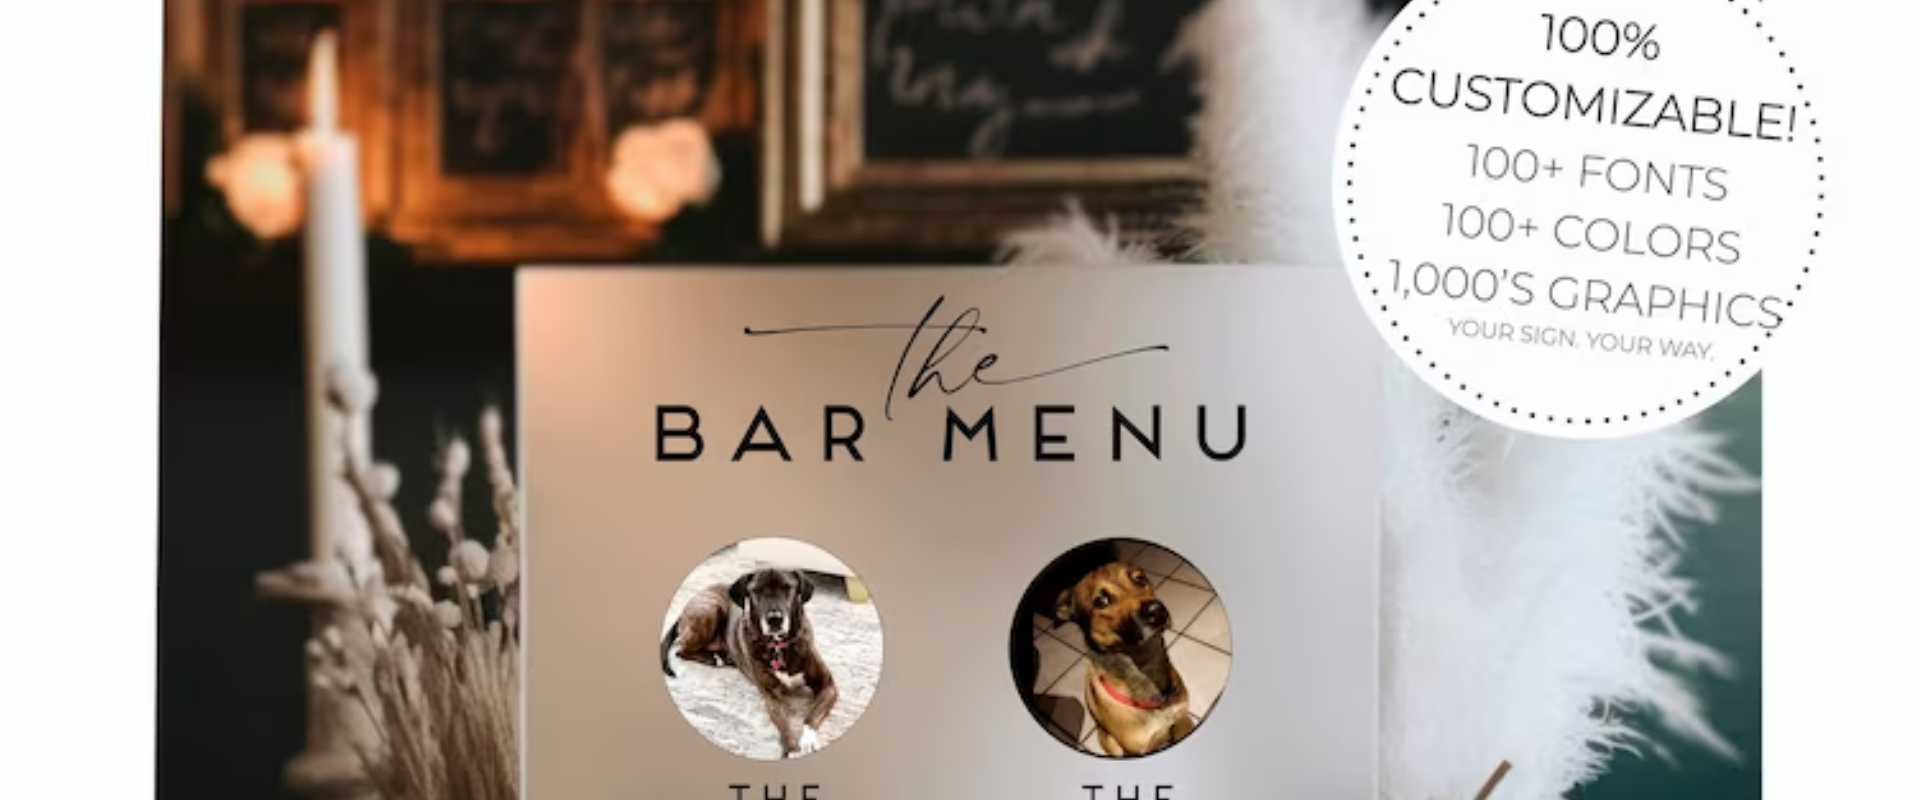 The Wedding Bar menu featuring signature cocktails with a photo of a dog and a candle.